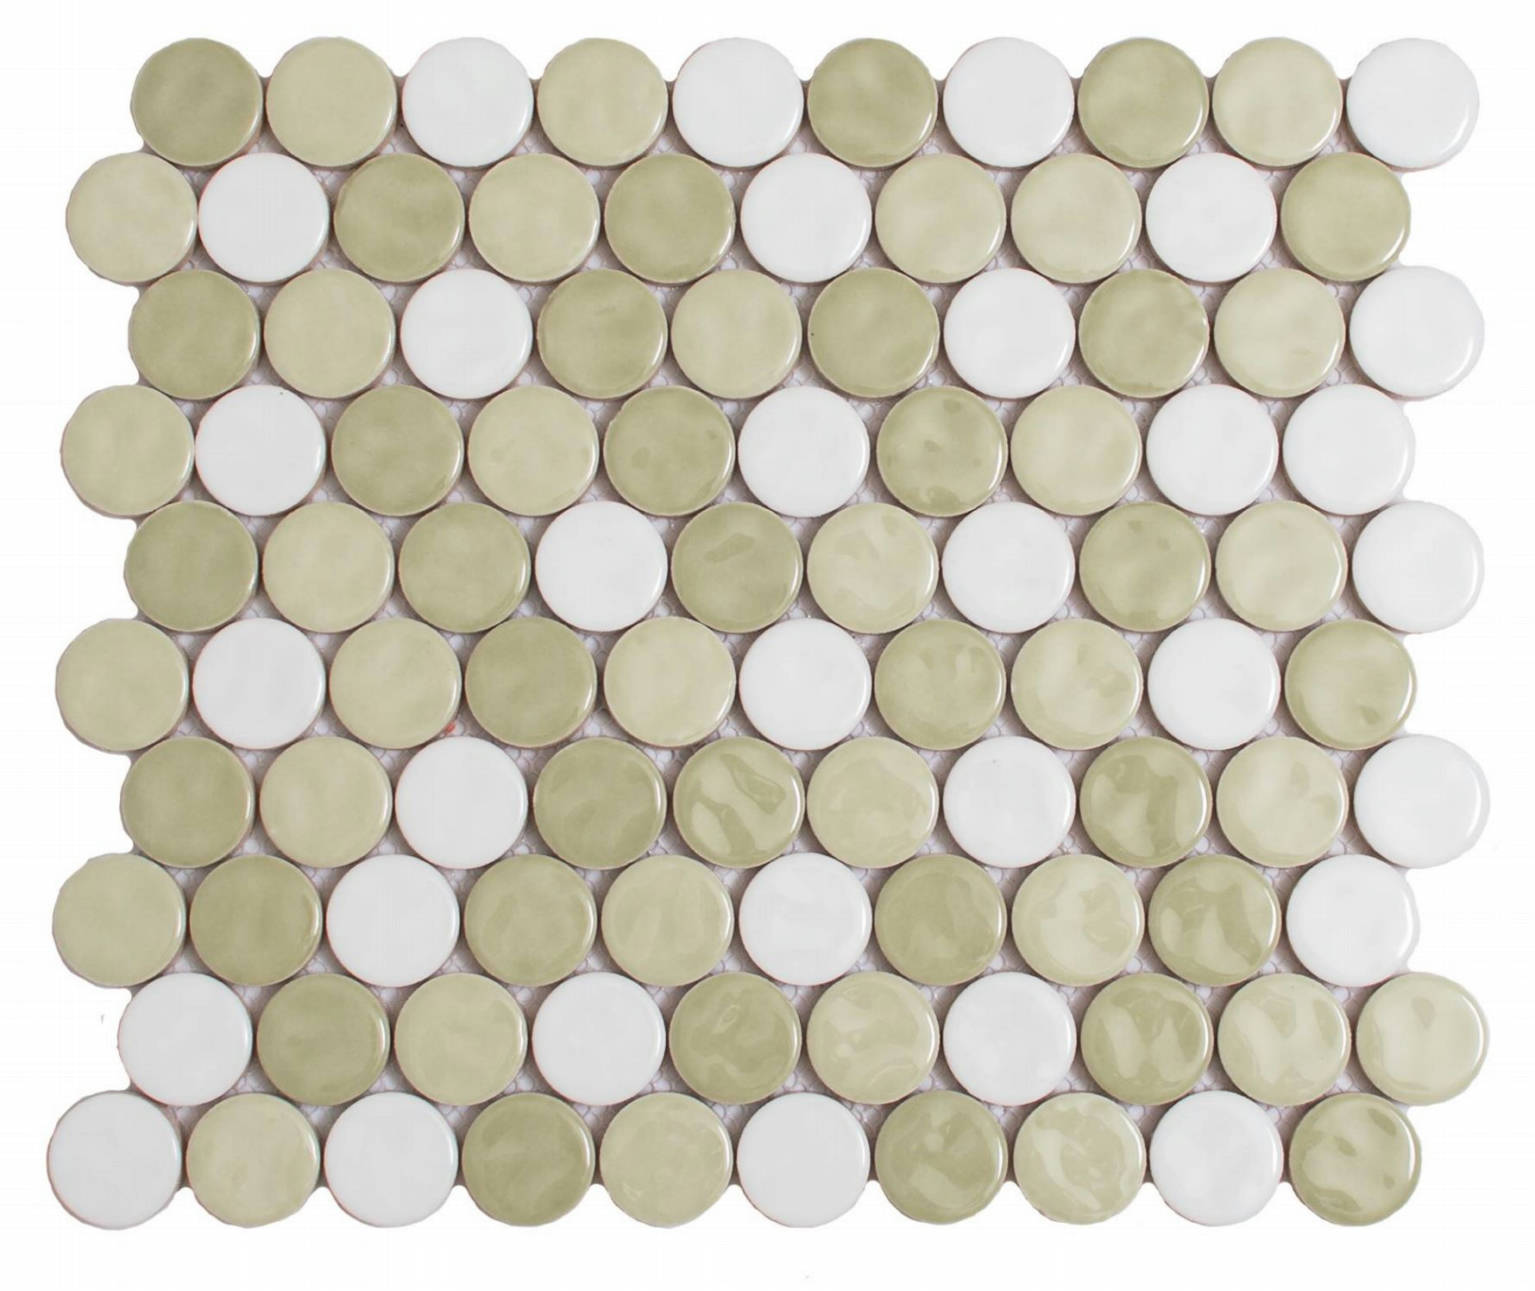 QS14-012122 | Stones & More | Finest selection of Mosaics, Glass, Tile and Stone